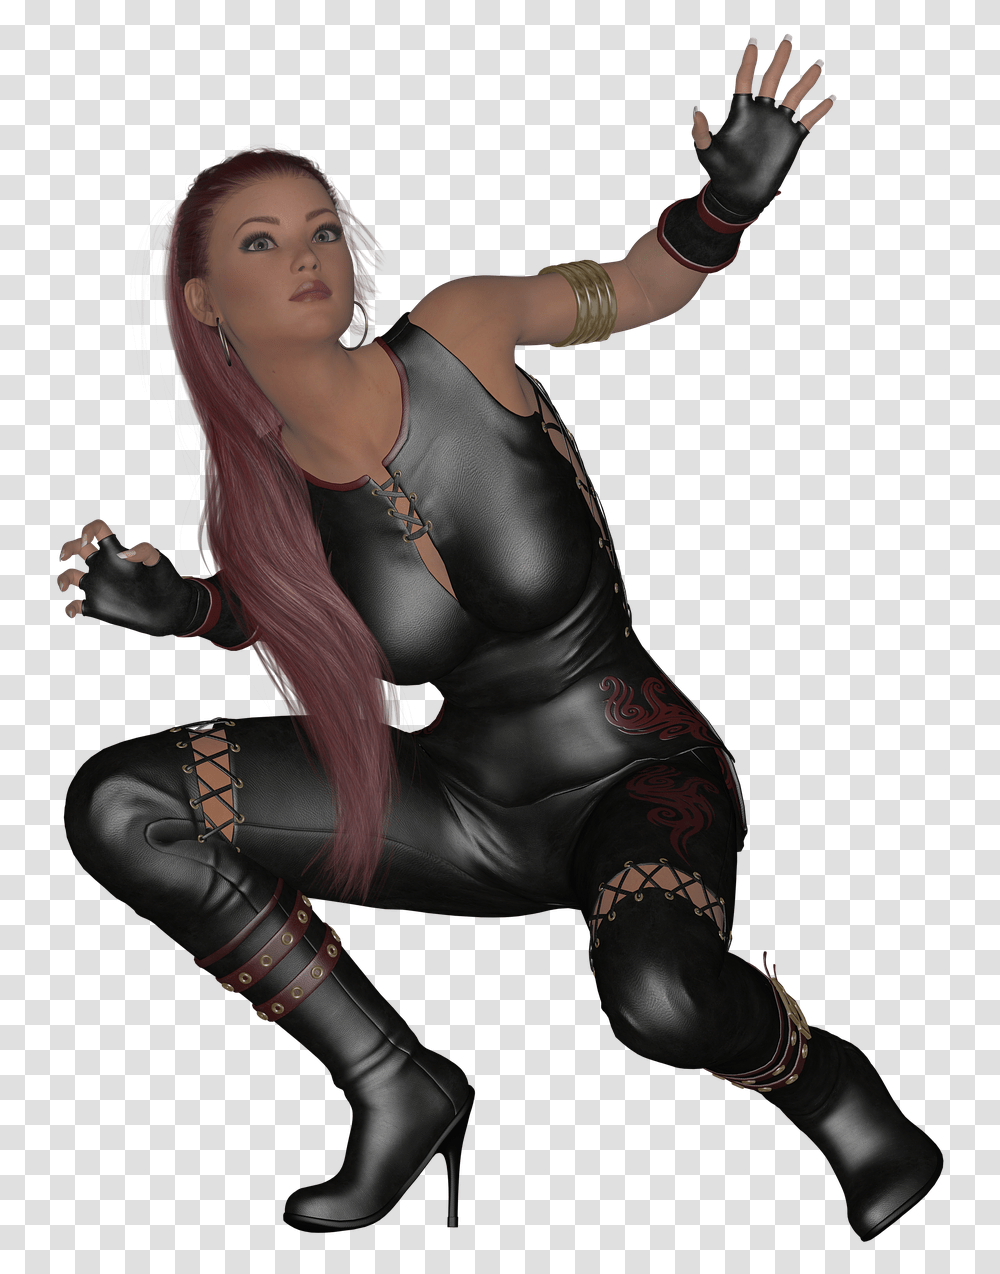 Women Warrior Pretty Free Photo Mujer Guerrera, Person, Footwear, Dance Pose Transparent Png